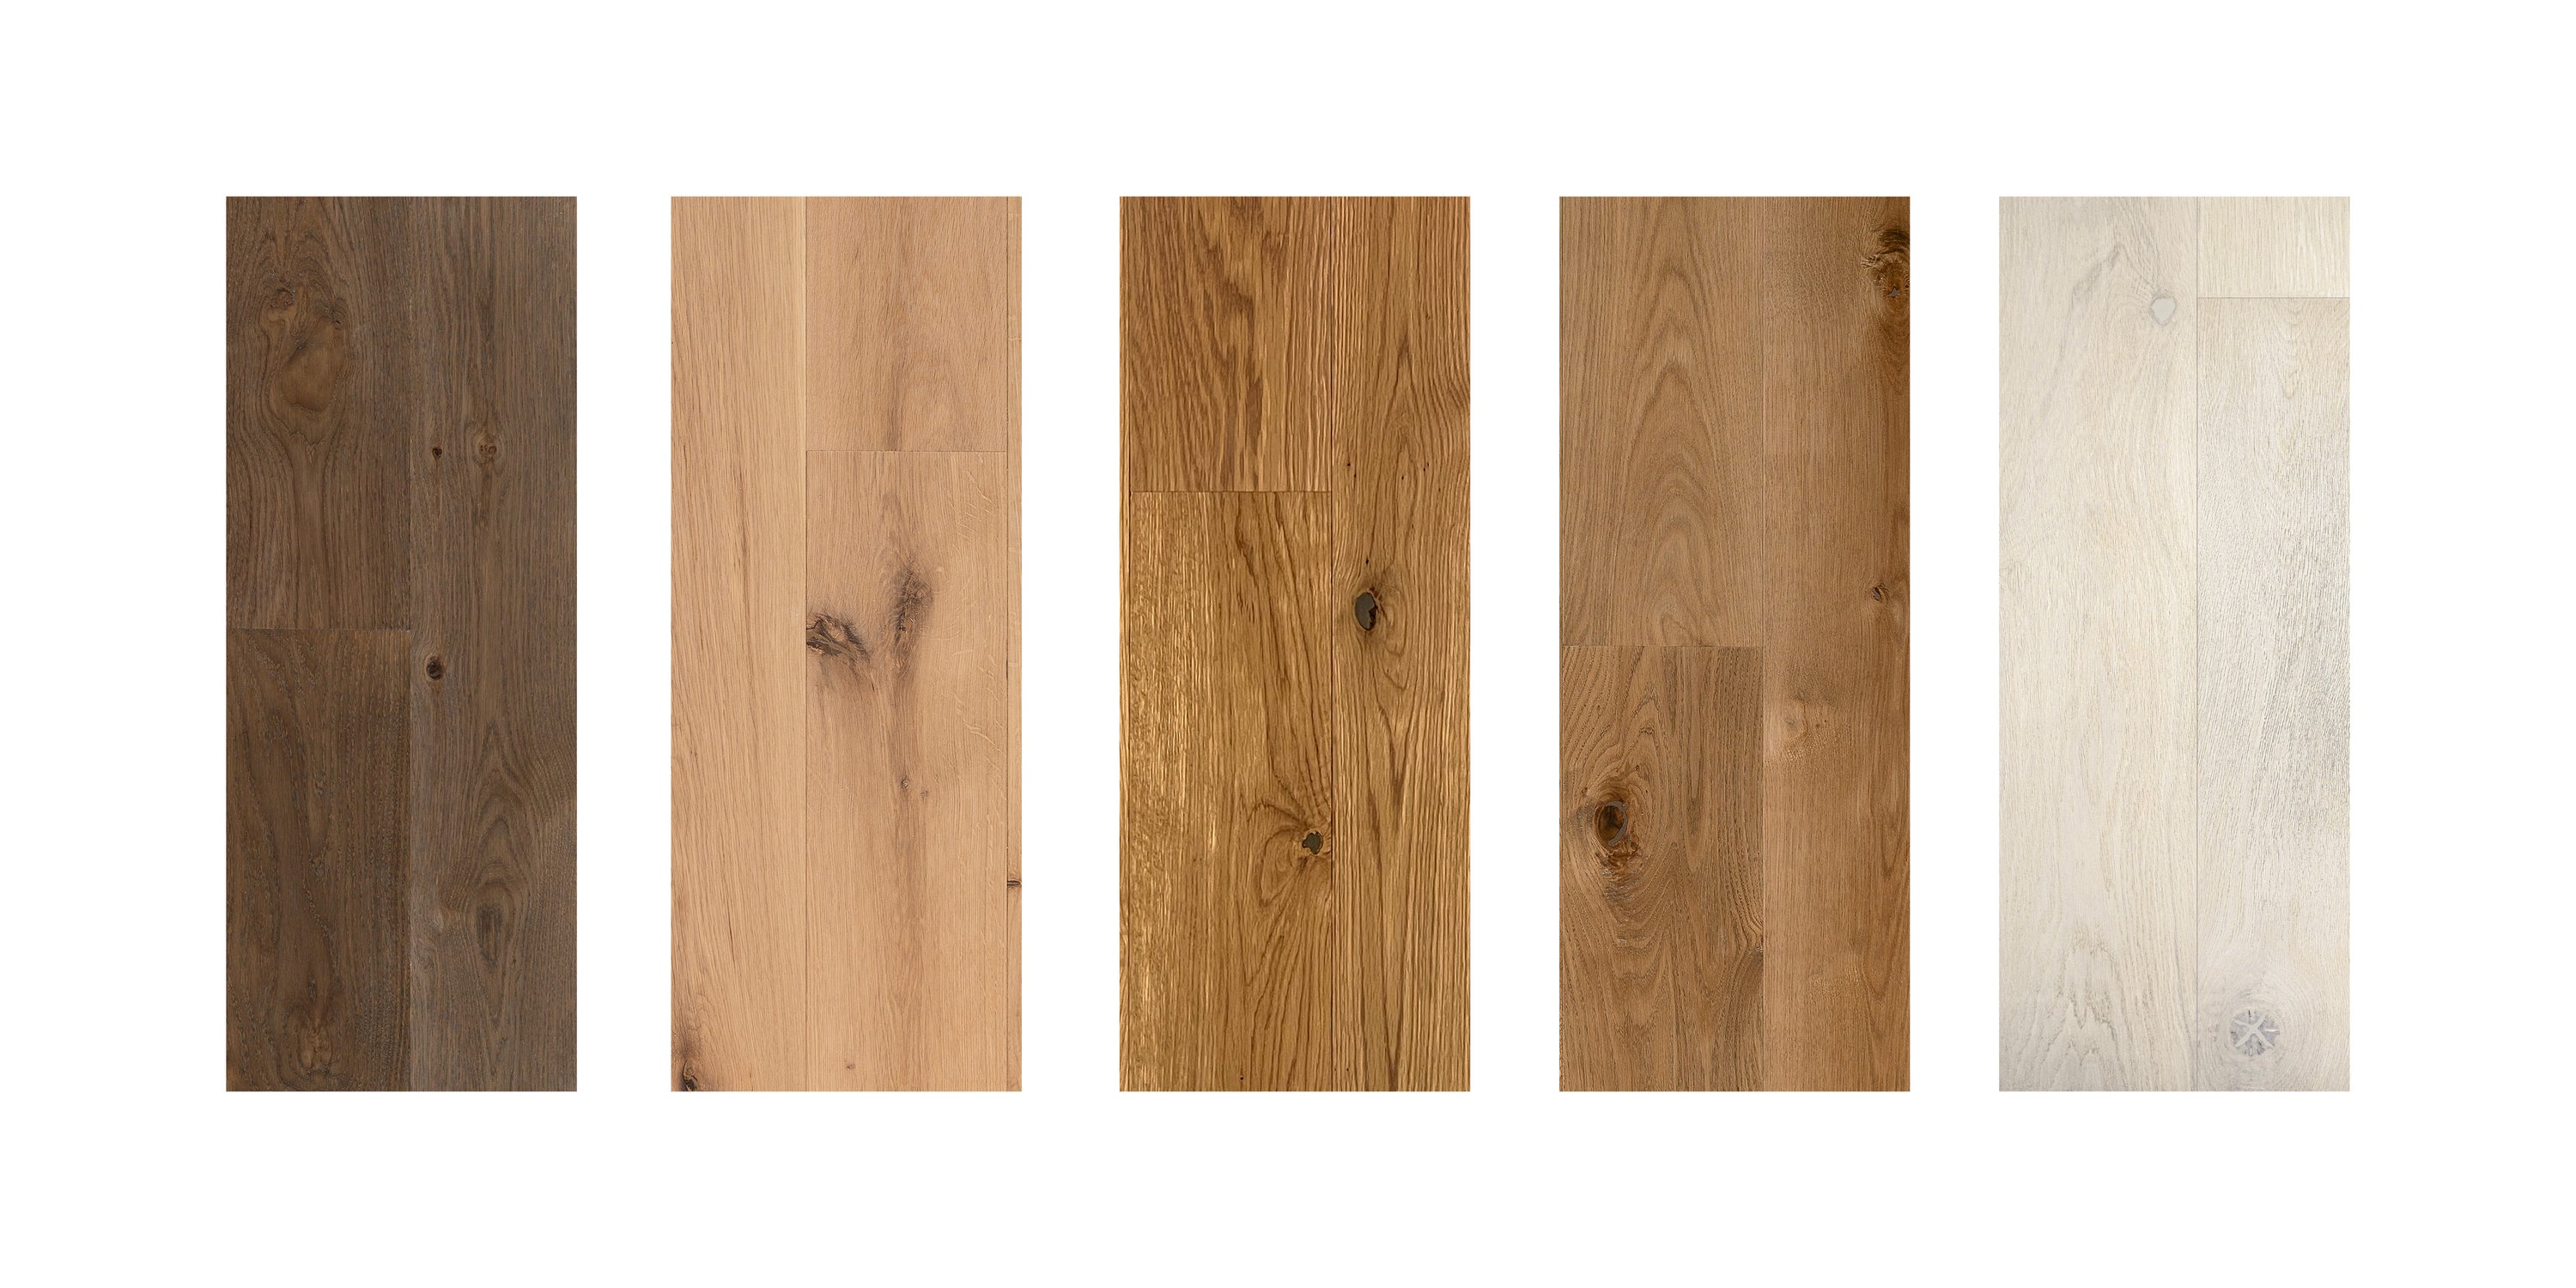 Northern Wide Plank Unveils Five New Shades of Engineered Wood Flooring Reflecting Emerging Design Trends